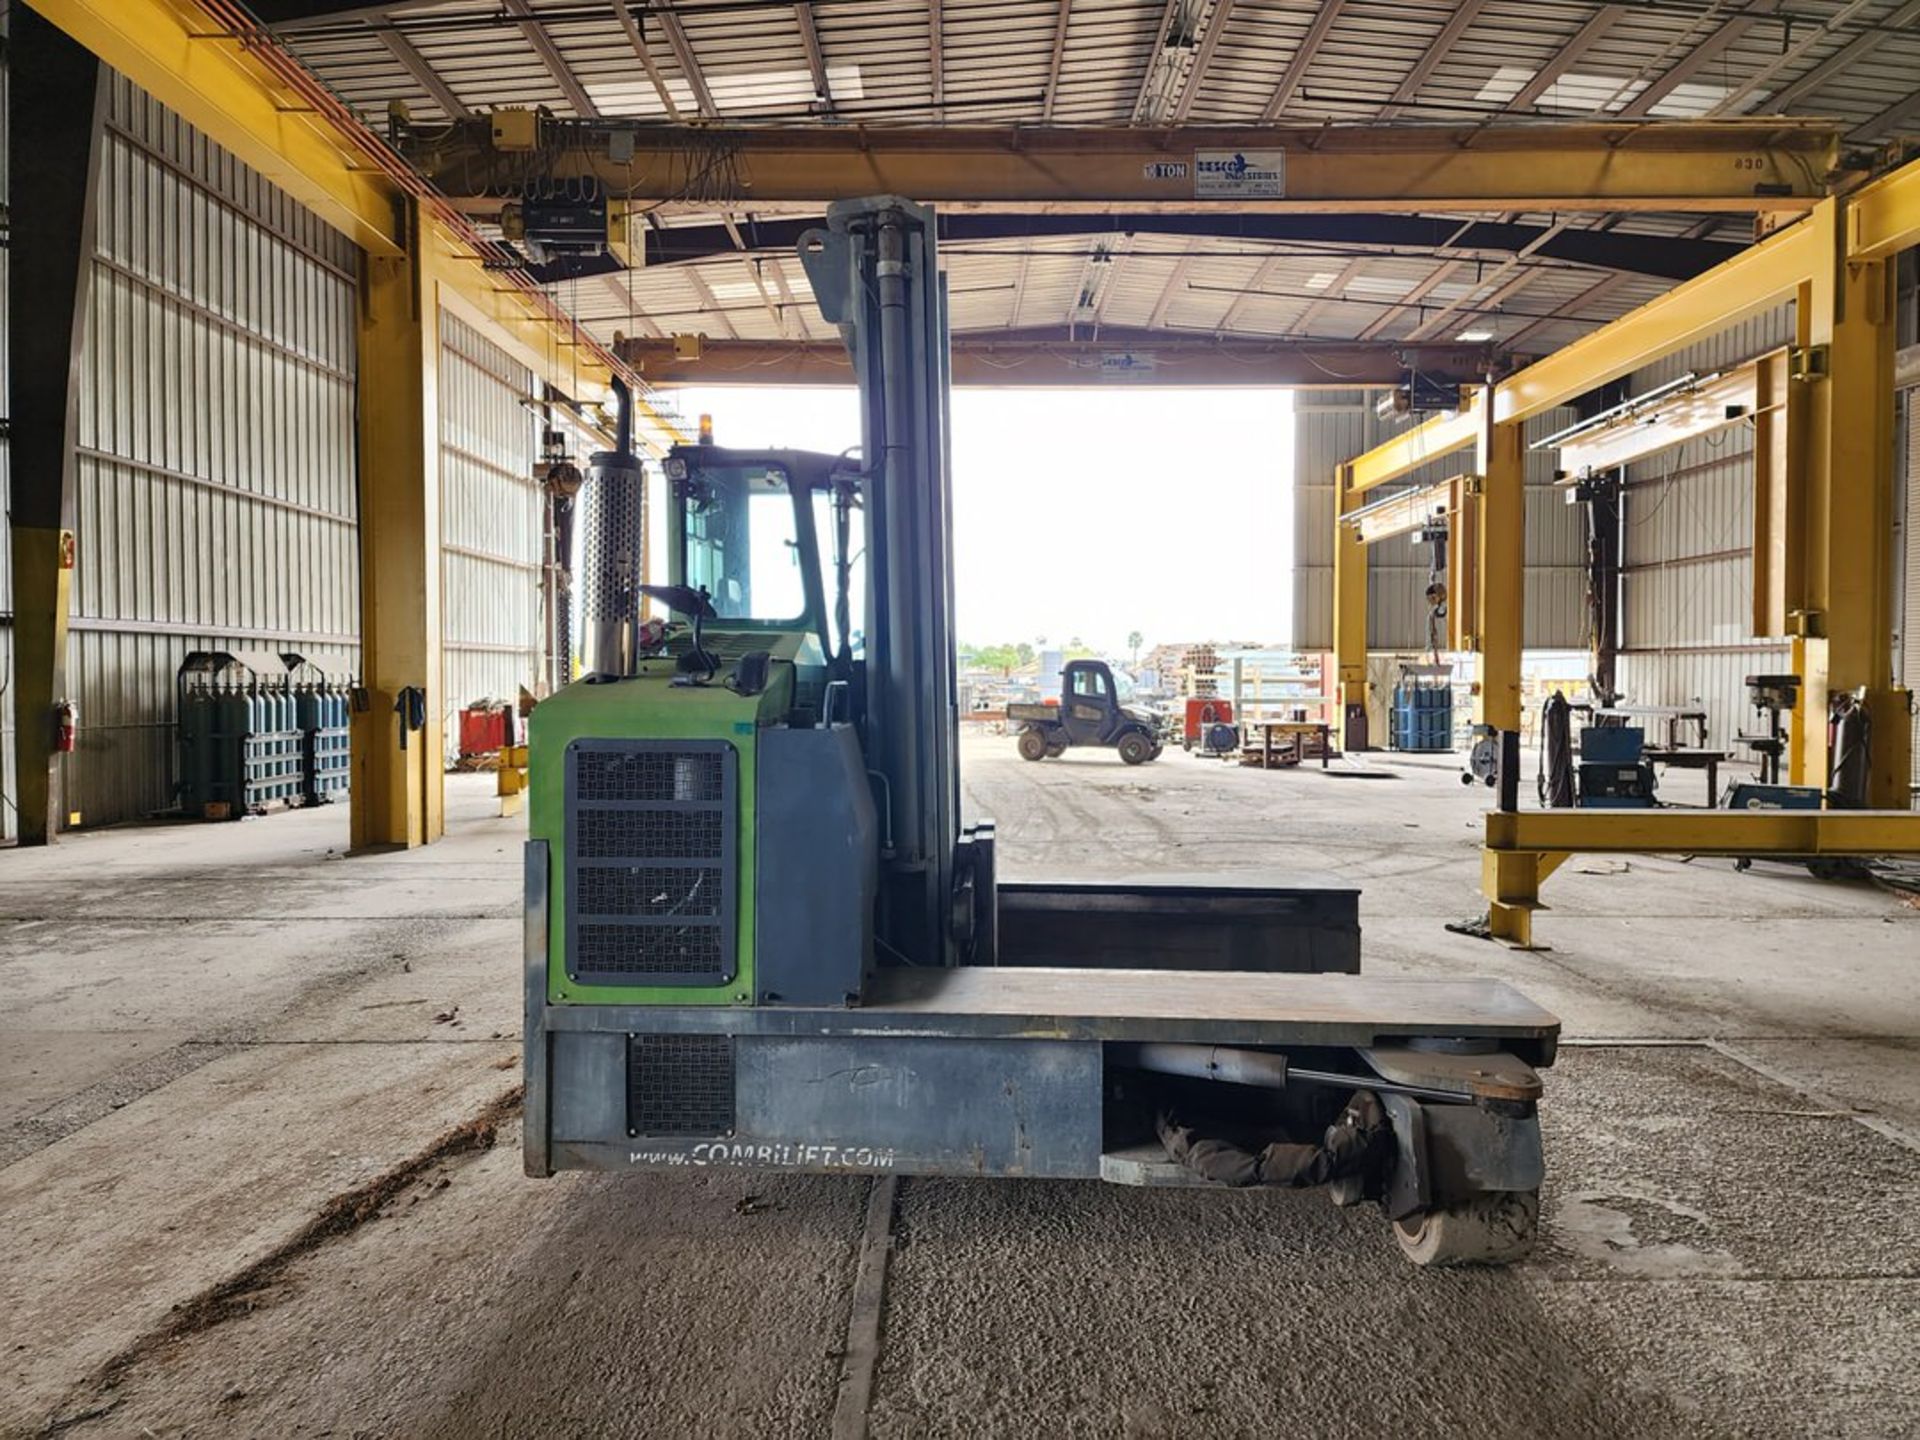 2011 Combi-Lift GL43260DA66 Multi-Directional Forklift 2-Stage Mast; Cap: 26,000lbs; Hrs: 3,773 ( - Image 7 of 11